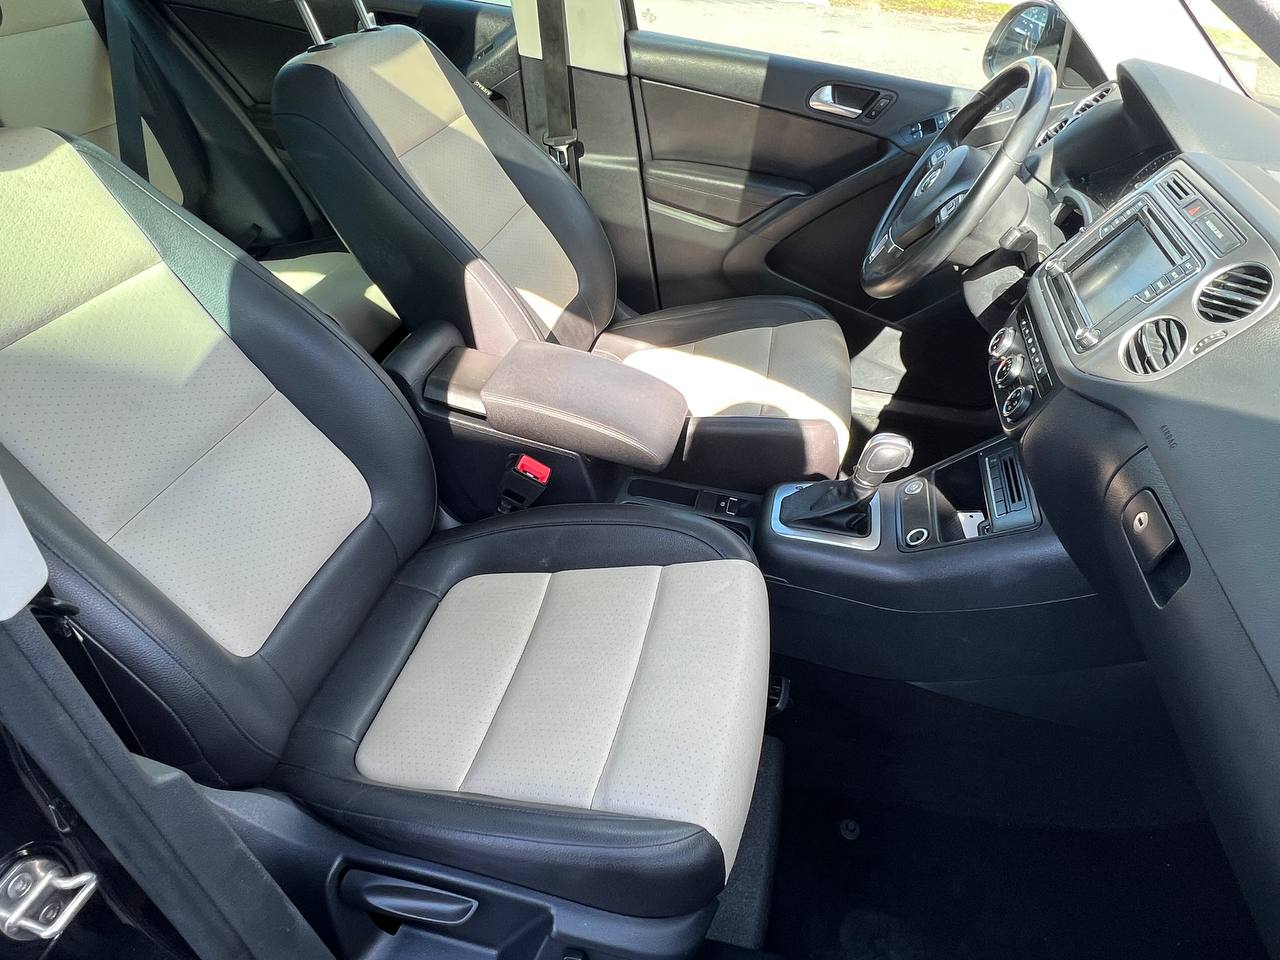 Used - Volkswagen Tiguan Wolfsburg Edition SUV for sale in Staten Island NY